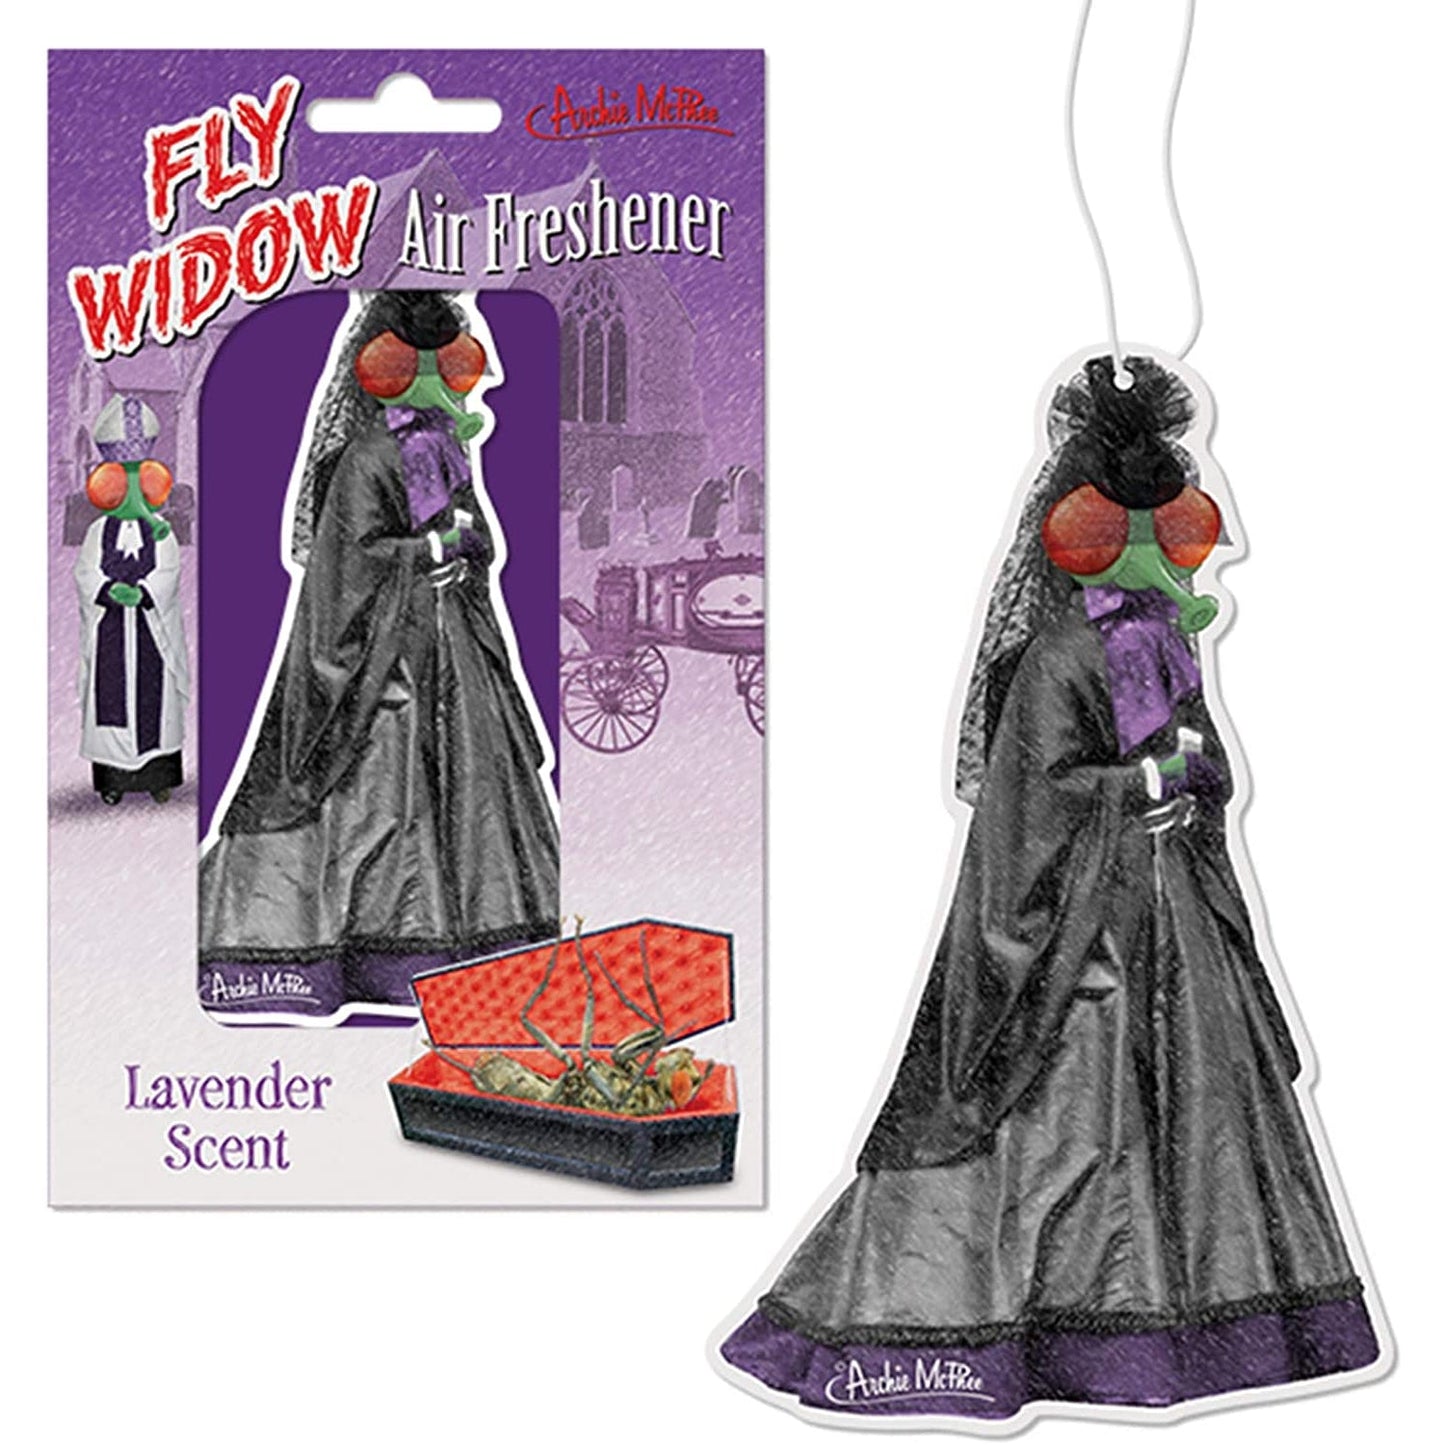 3 Pack Fly Widow Air Freshener in Lavender Scent